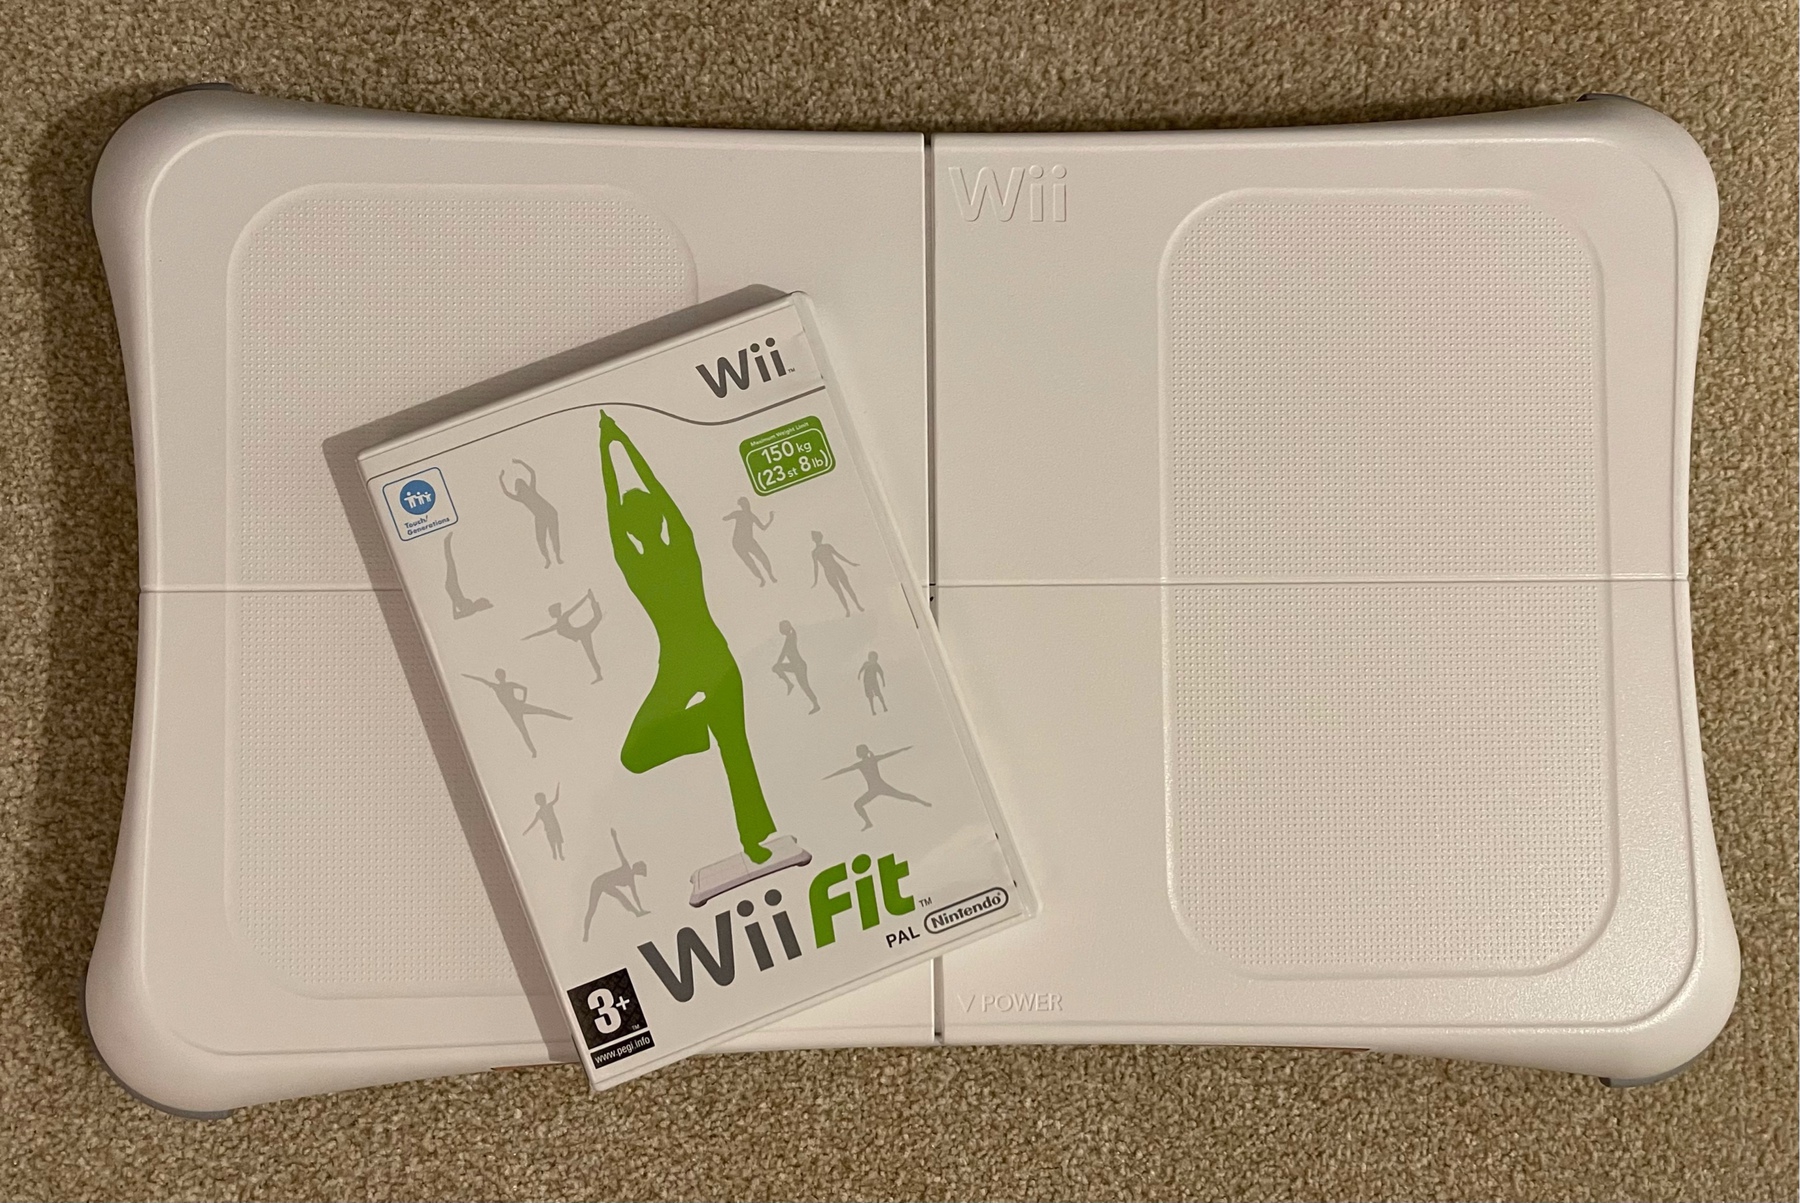 Nintendo Wii Balance Board and Wii Fit game